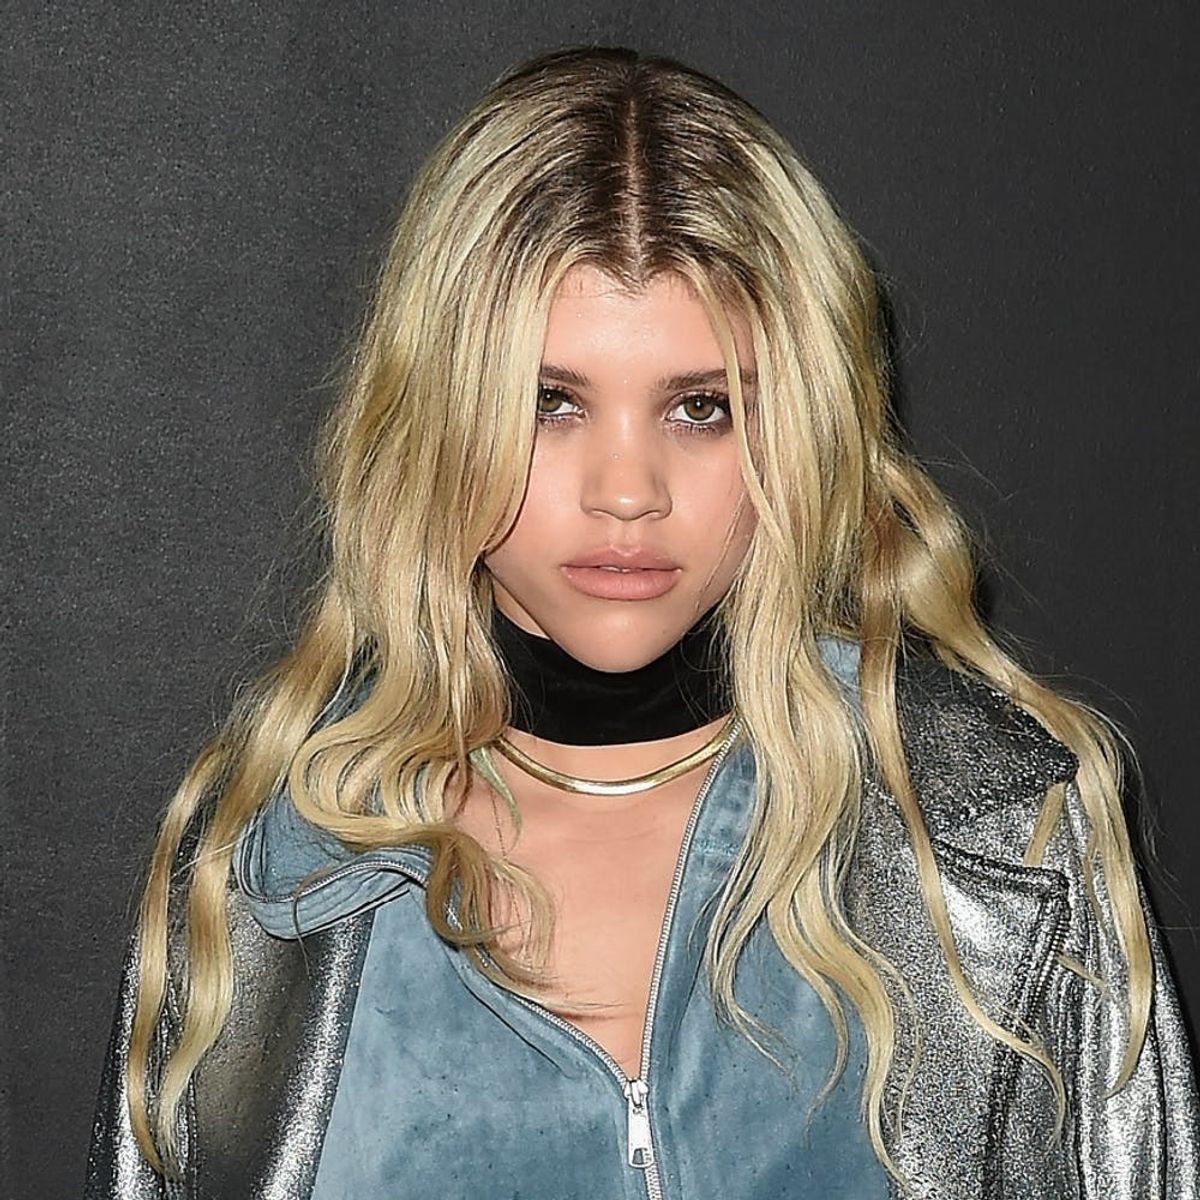 Sofia Richie Bids Adieu to Her Hair (and Haters) With a Brand New Cut That’s Chic AF